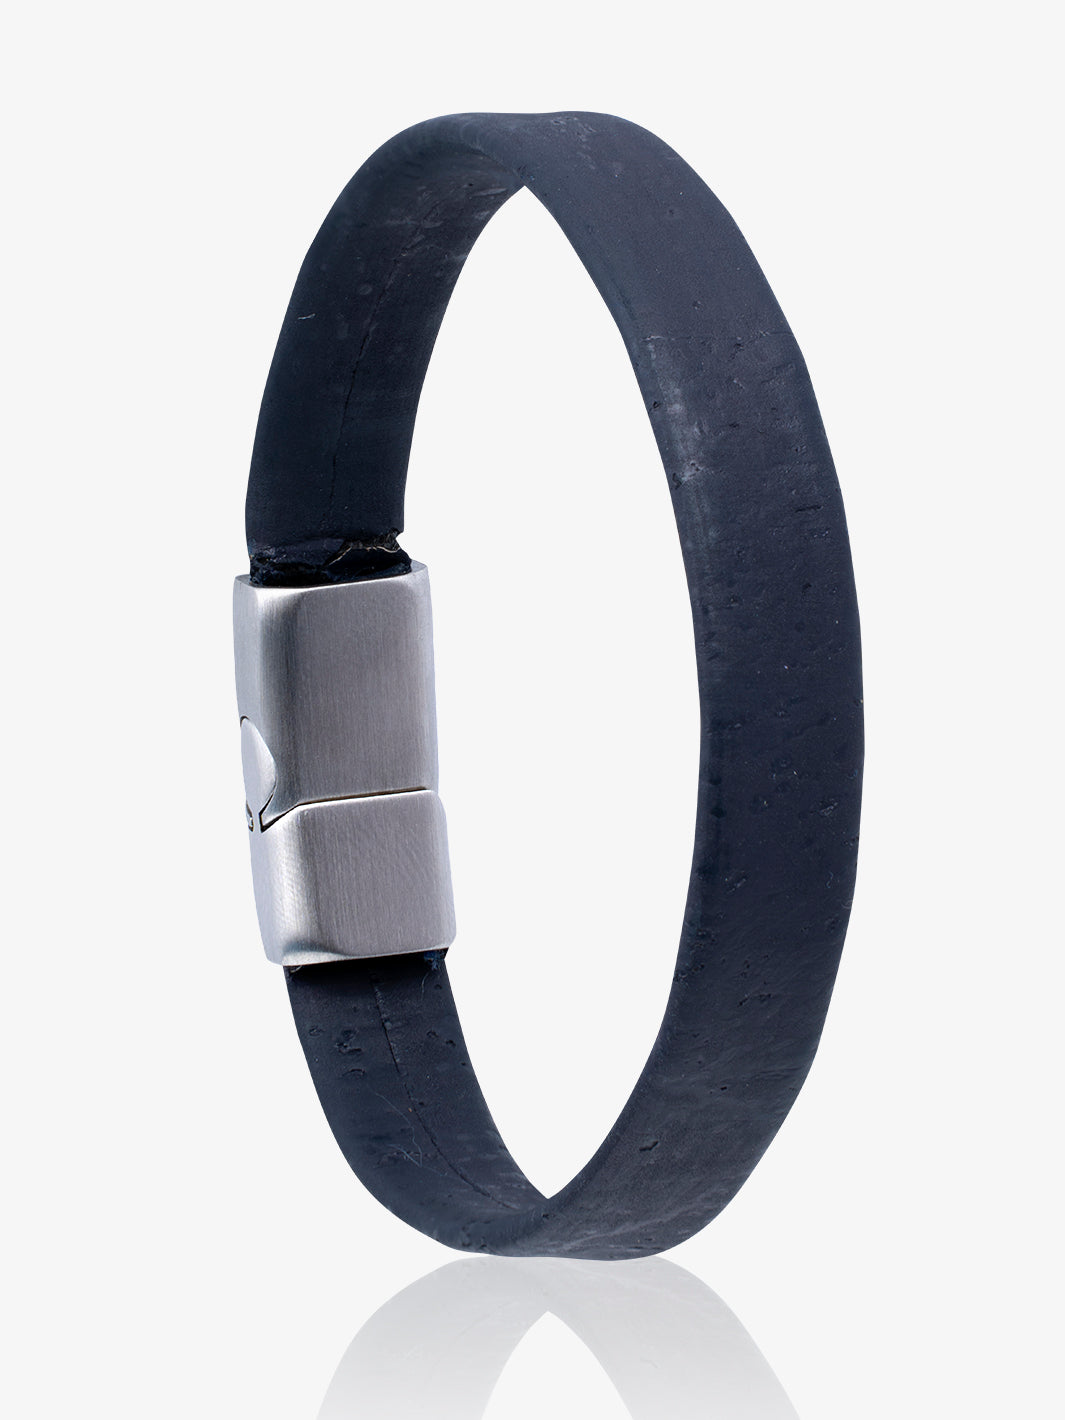 Space Blue Wrist Band for Men with Magnetic Clasp. 